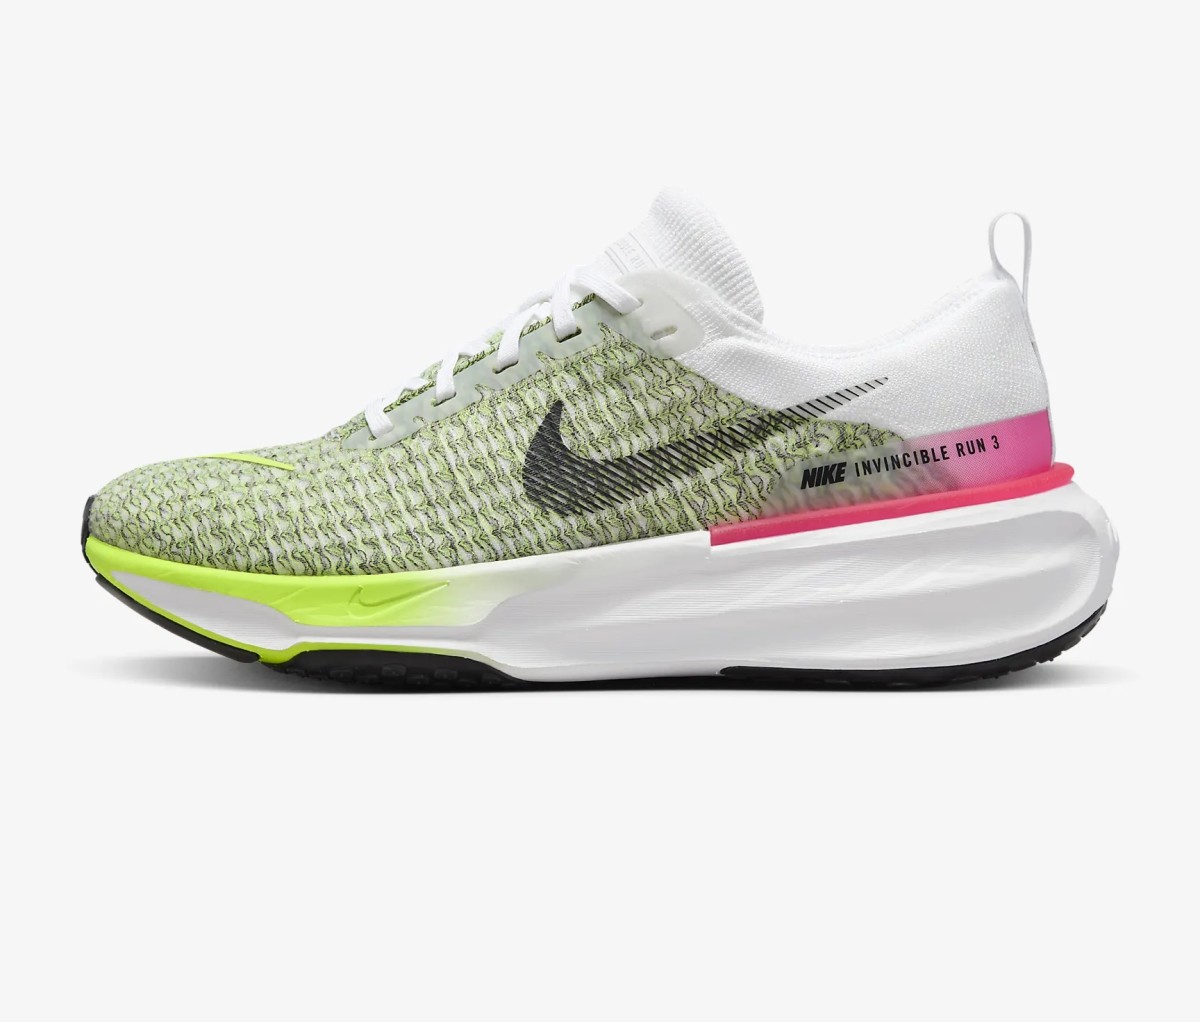 Best Nike Running Shoes for High Arches.